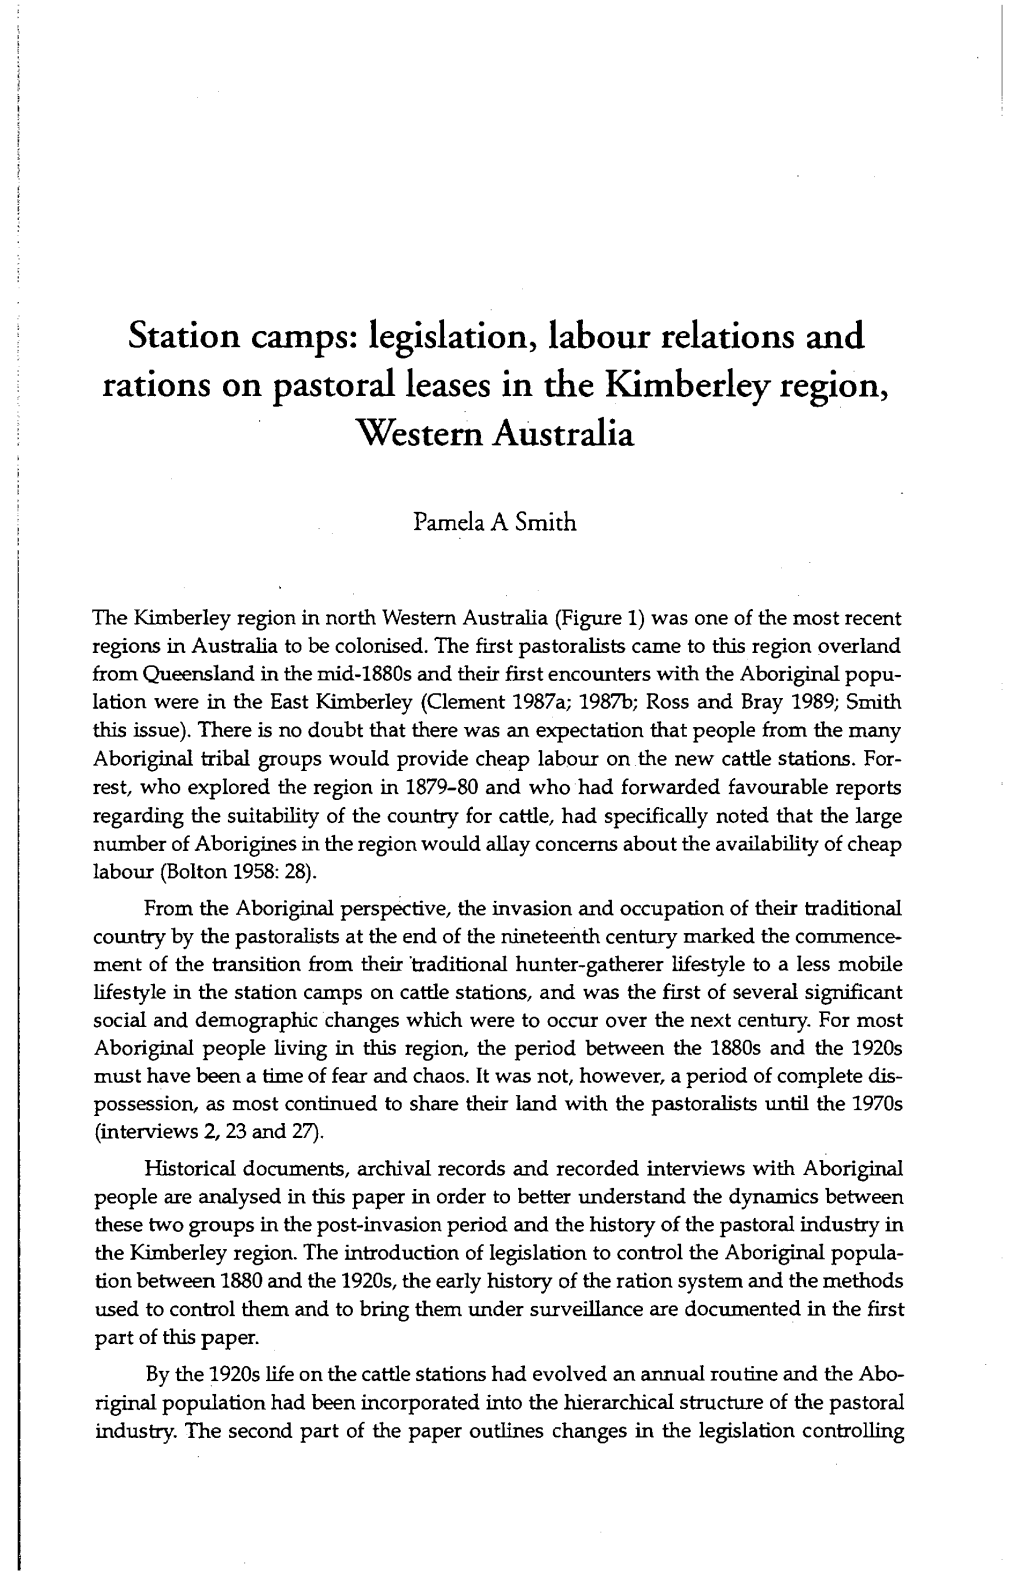 Legislation, Labour Relations and Rations on Pastoral Leases in the Kimberley Region, Western Australia